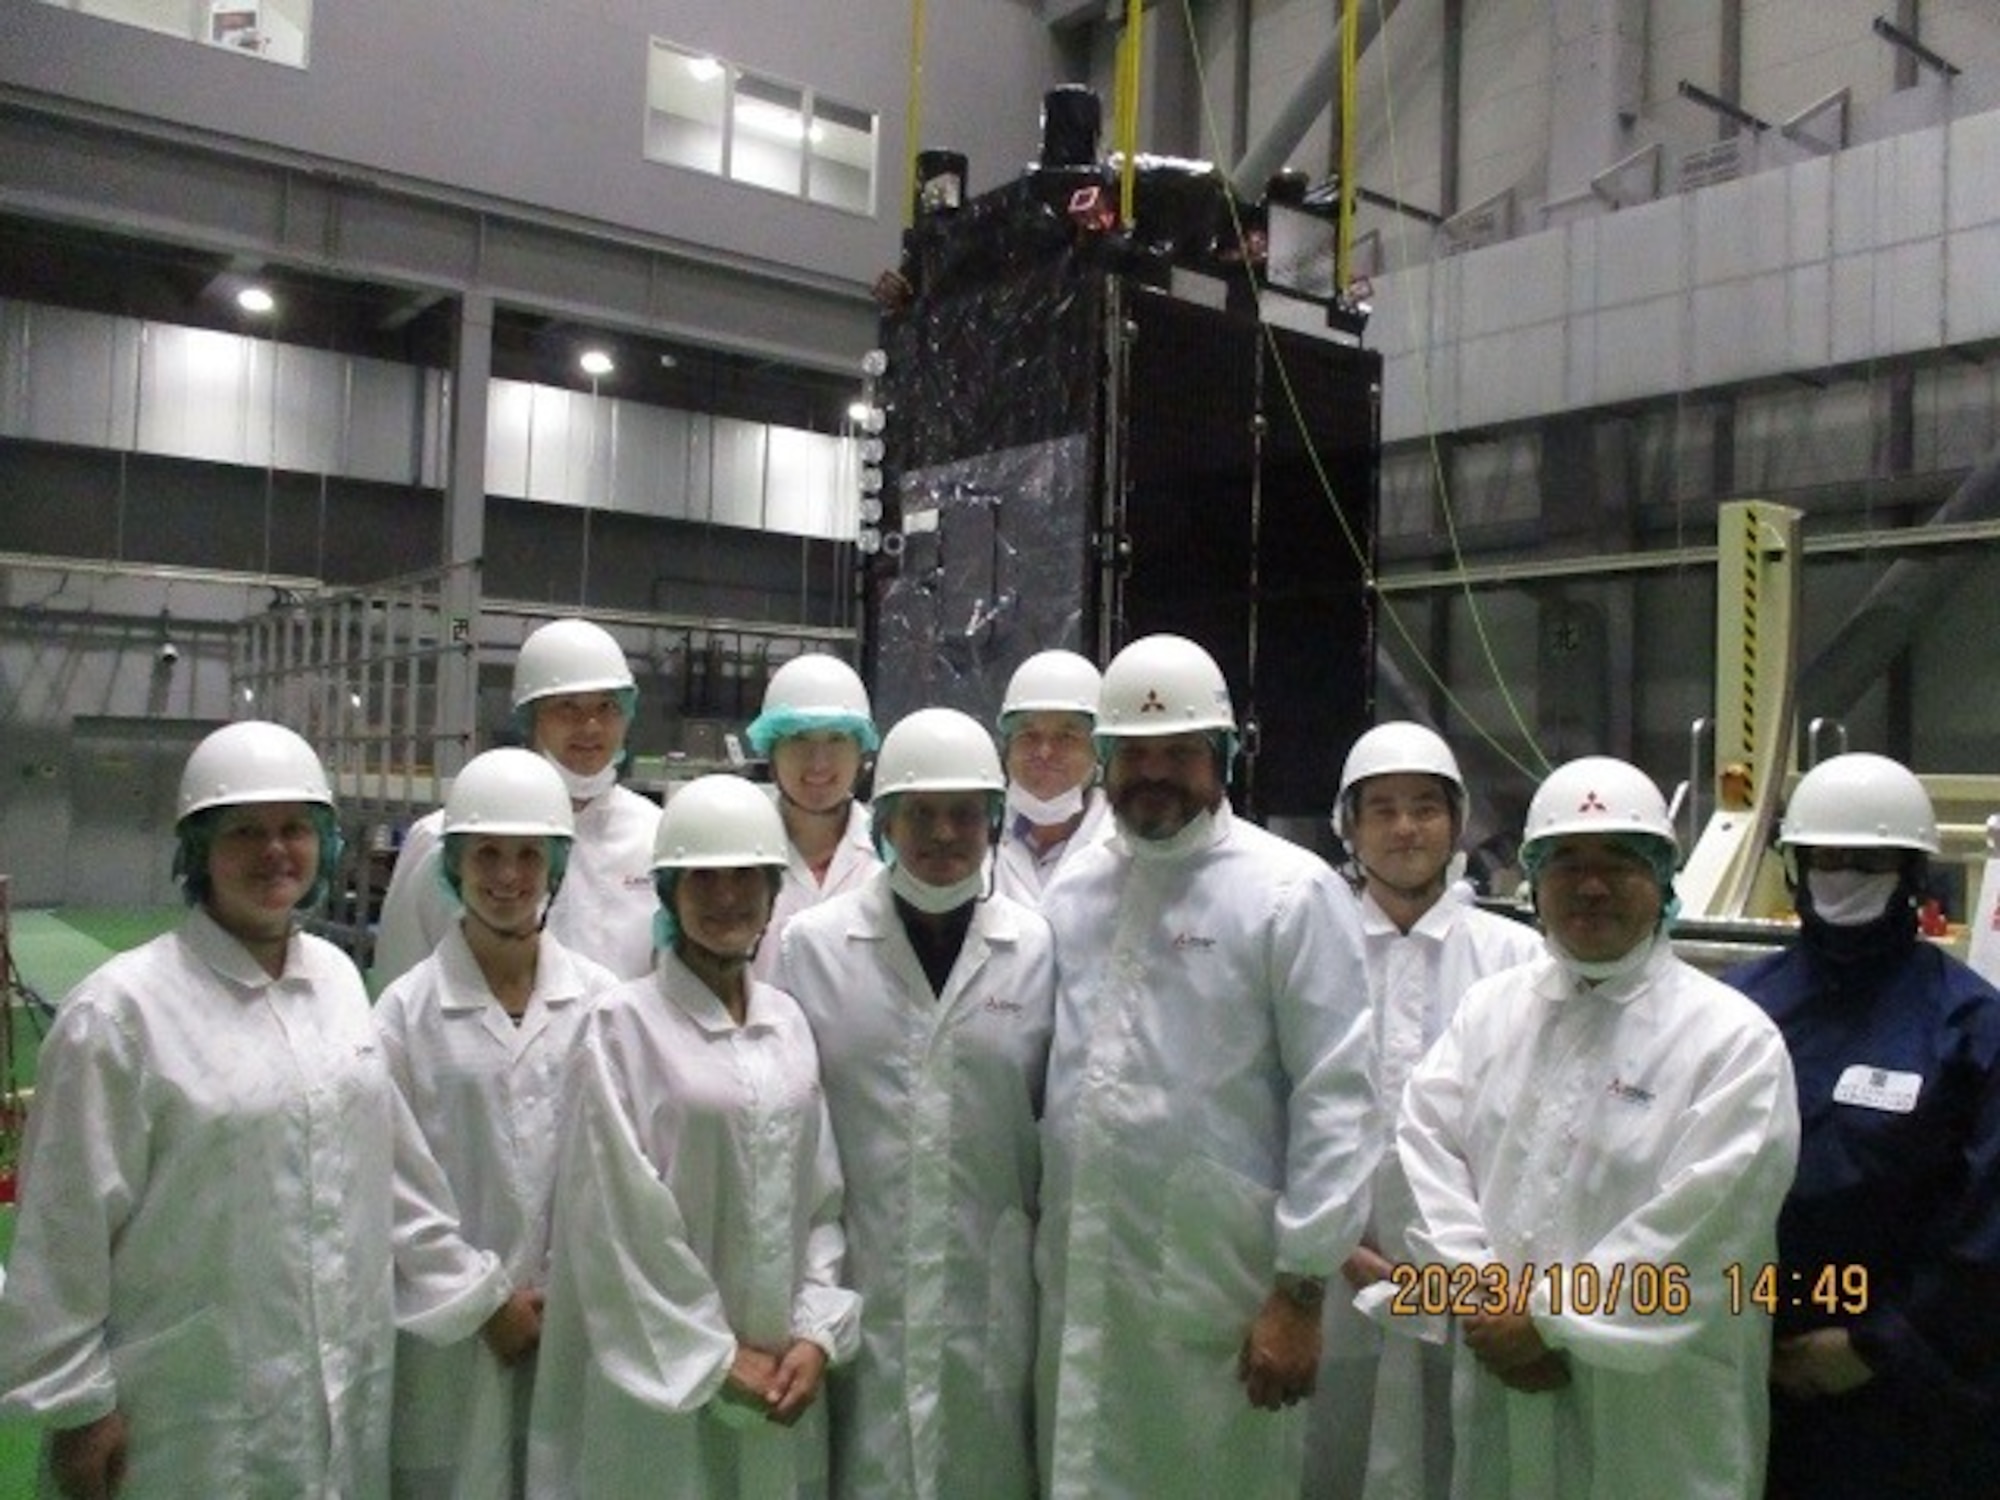 Members from U.S. Space Force’s Space Delta 2-Space Domain Awareness and Space Battle Management, Space Systems Command, and Japan's National Space Policy Secretariat tour the Mitsubishi Electric Corporation facility in Japan, to inspect the Quasi-Zenith Satellite System Oct. 6, 2023. Onboard the QZSS is DEL 2’s Hosted Payload which will provide critical SDA information back to both countries while expanding Japan’s SDA capabilities. (Courtesy photo)